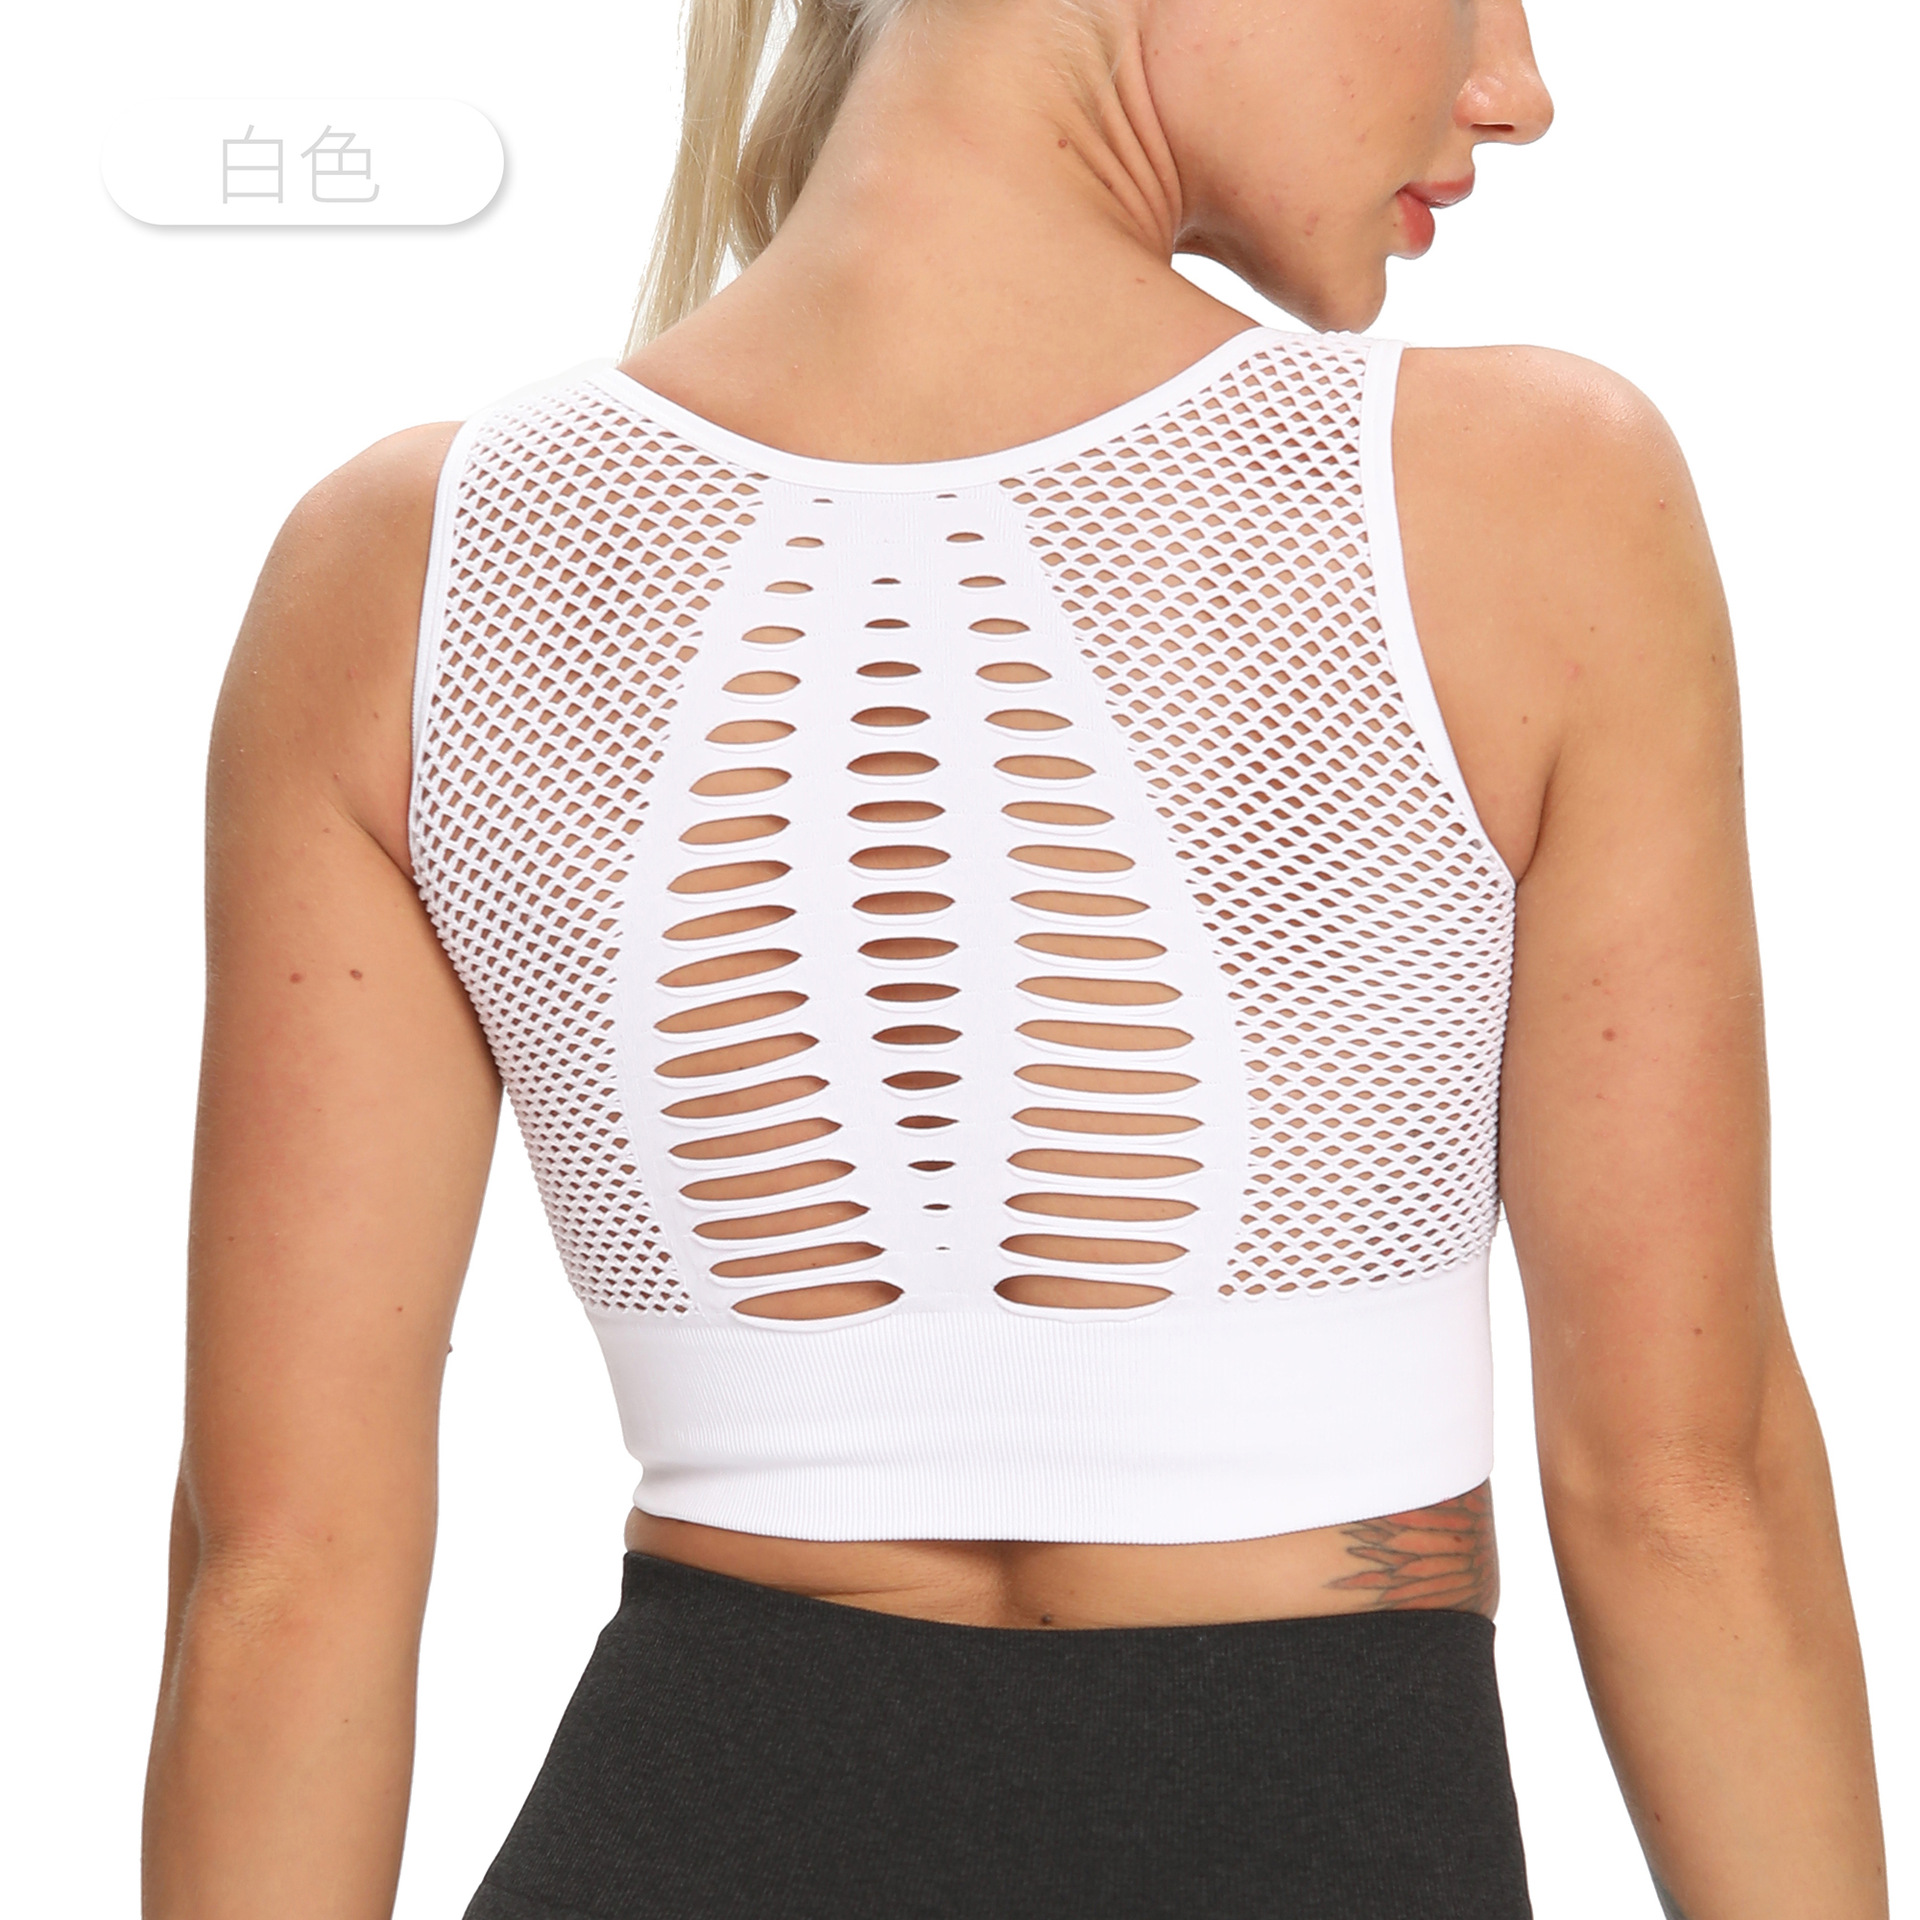 Sexy Cut-out Mesh Back Tops See Through Vest